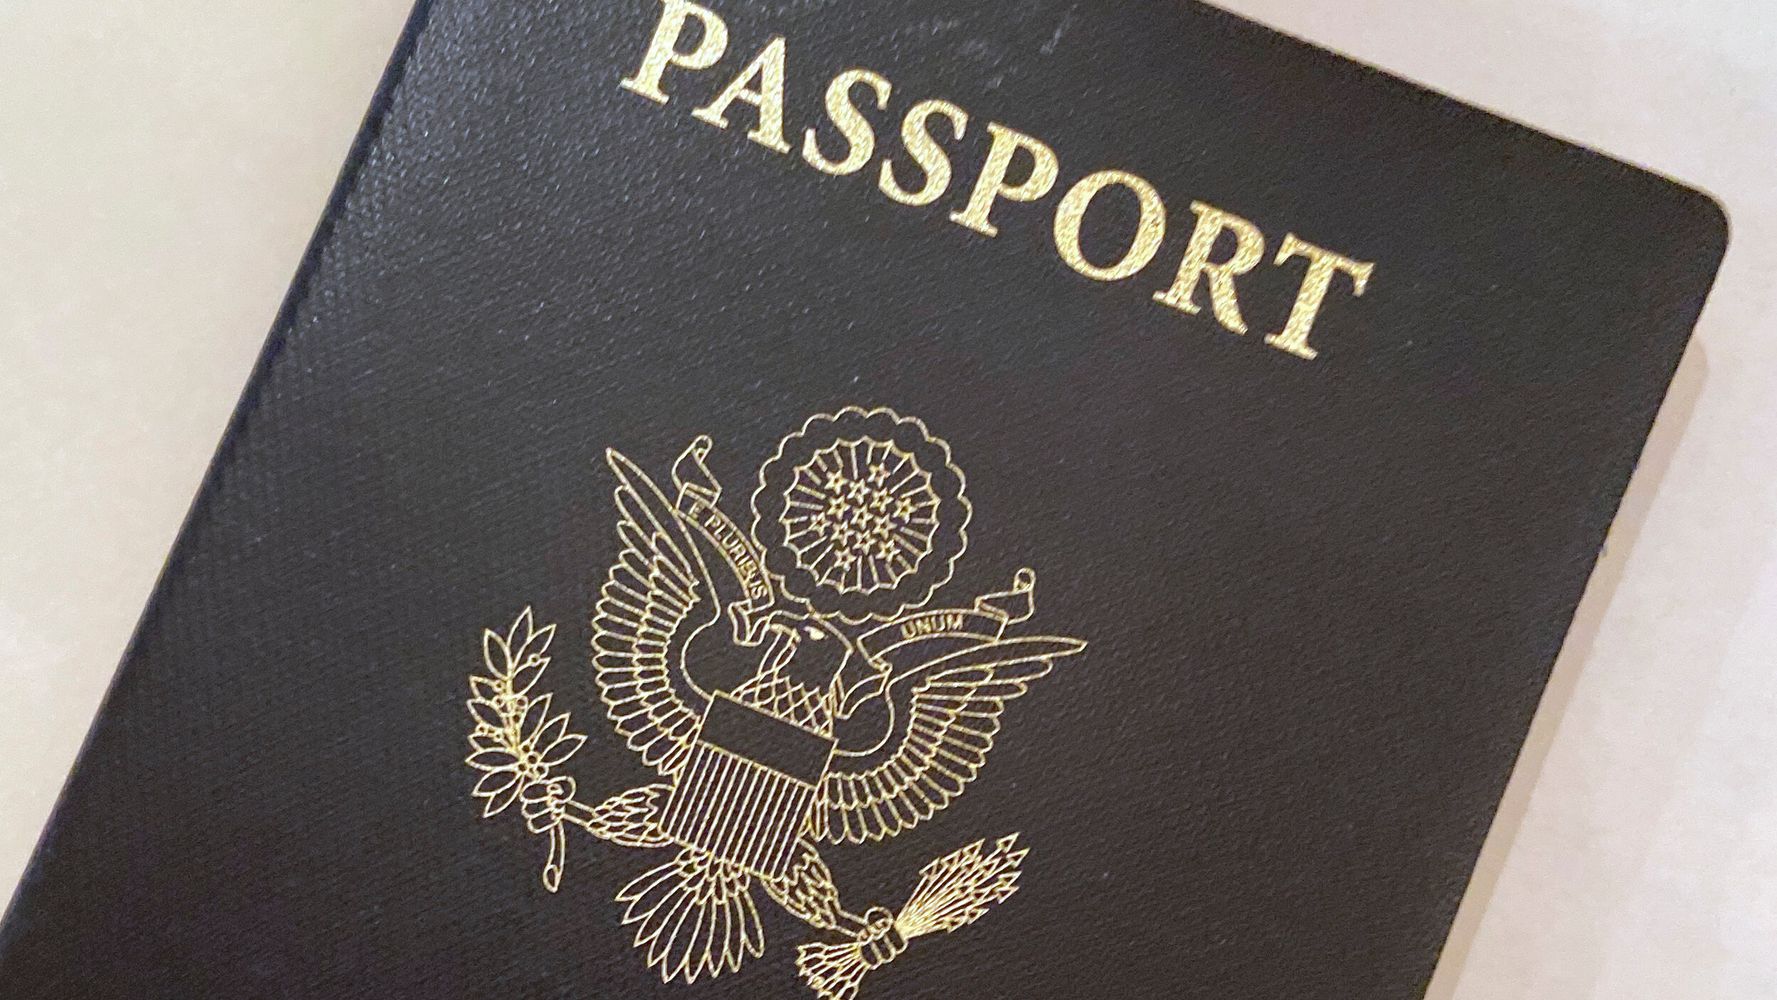 U.S. Passports To Have 'X' Gender Marker From April 11